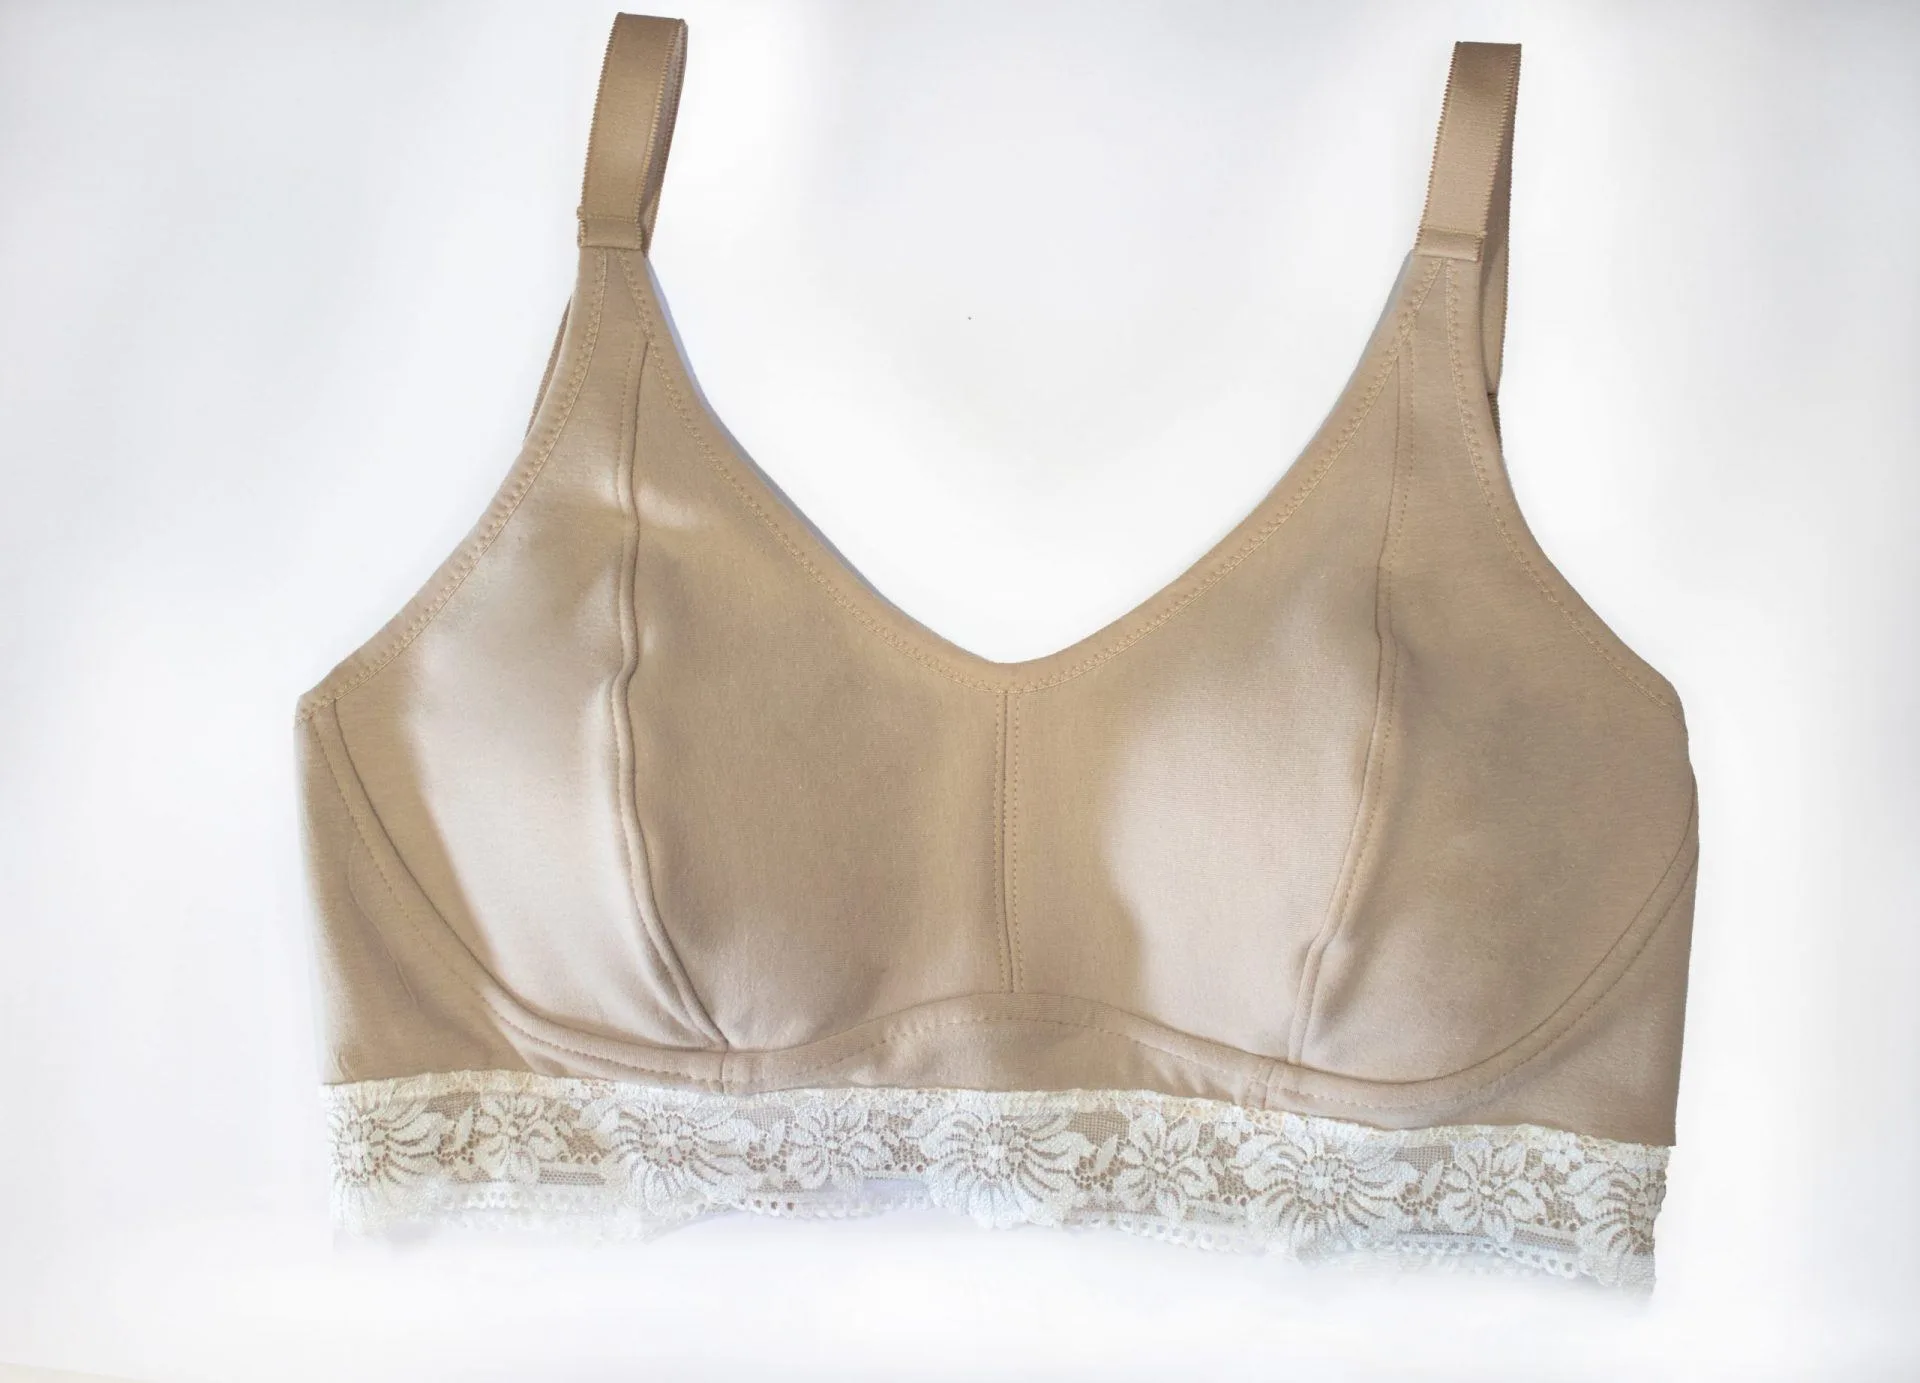 Reach For Recovery Cape Peninsula Branch Launches Their First Mastectomy Bra